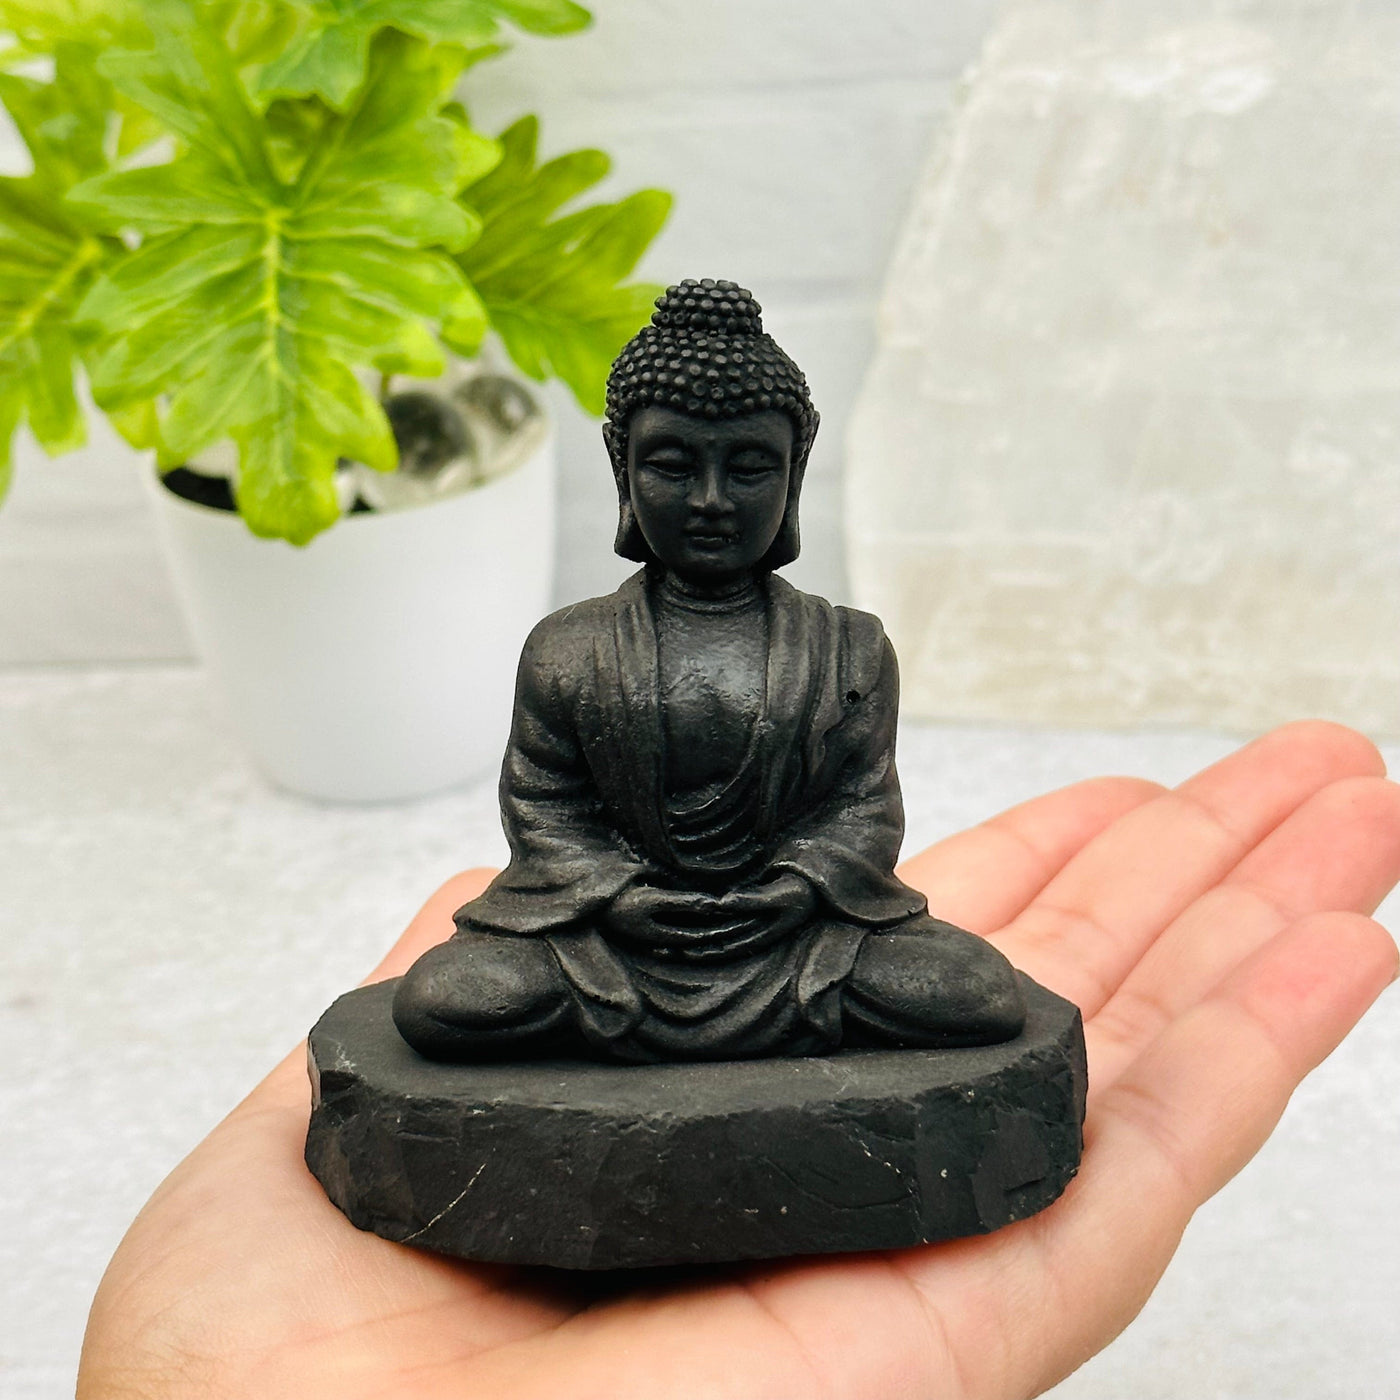 Shungite Sitting Buddha in hand for size reference 